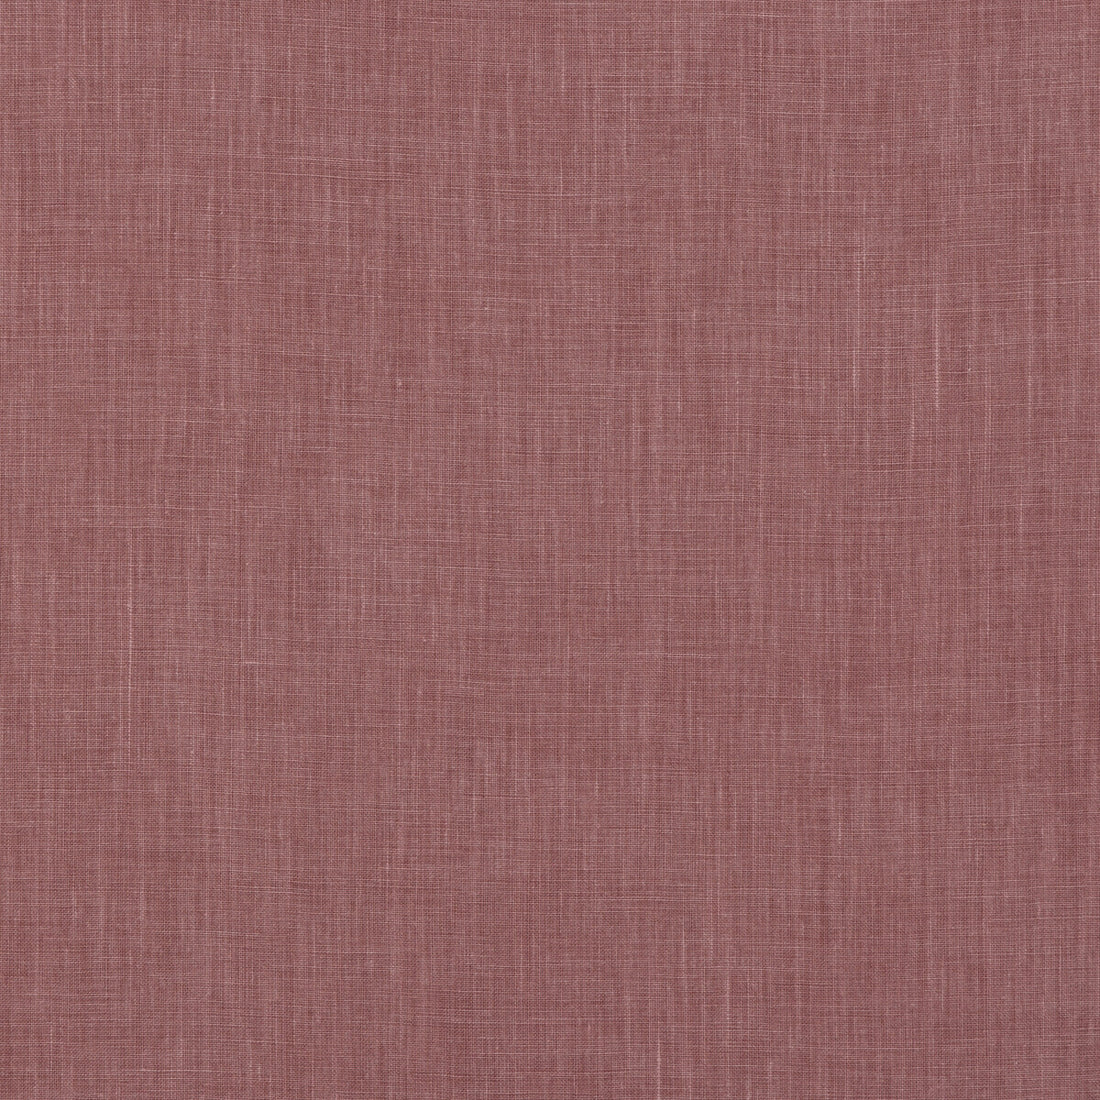 Weathered Linen fabric in dusky rose color - pattern BF10962.405.0 - by G P &amp; J Baker in the Baker House Linens collection